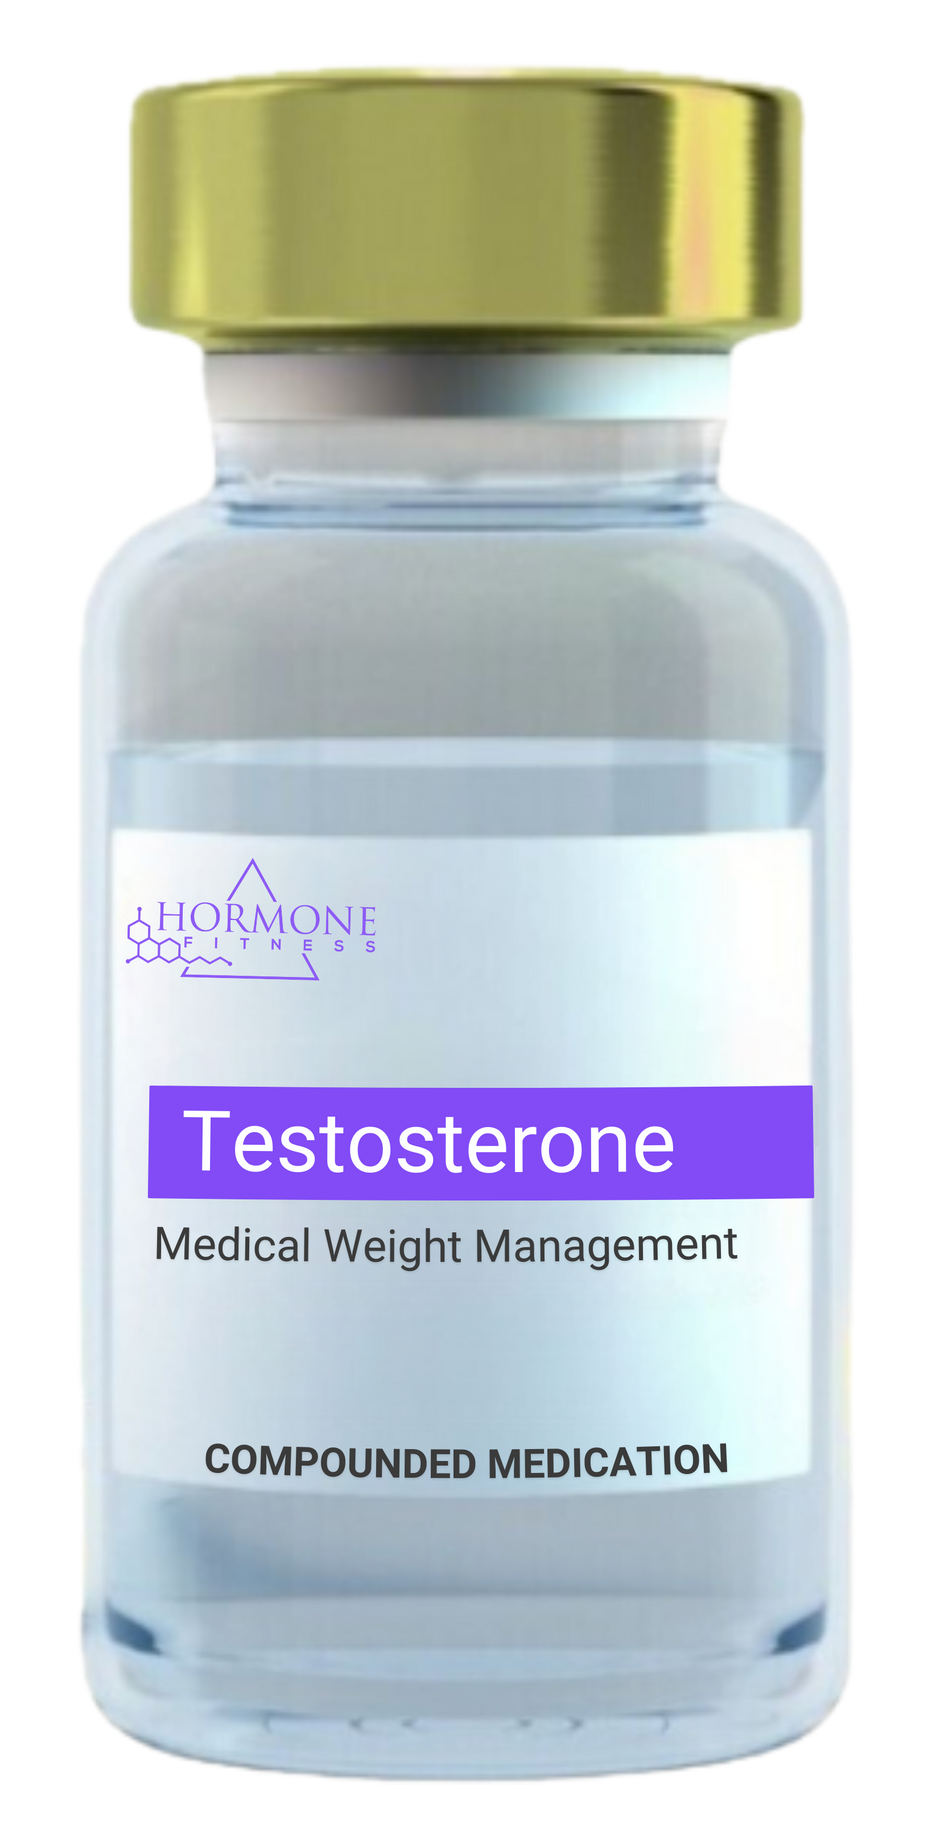 A vial of testosterone is shown on a white background.